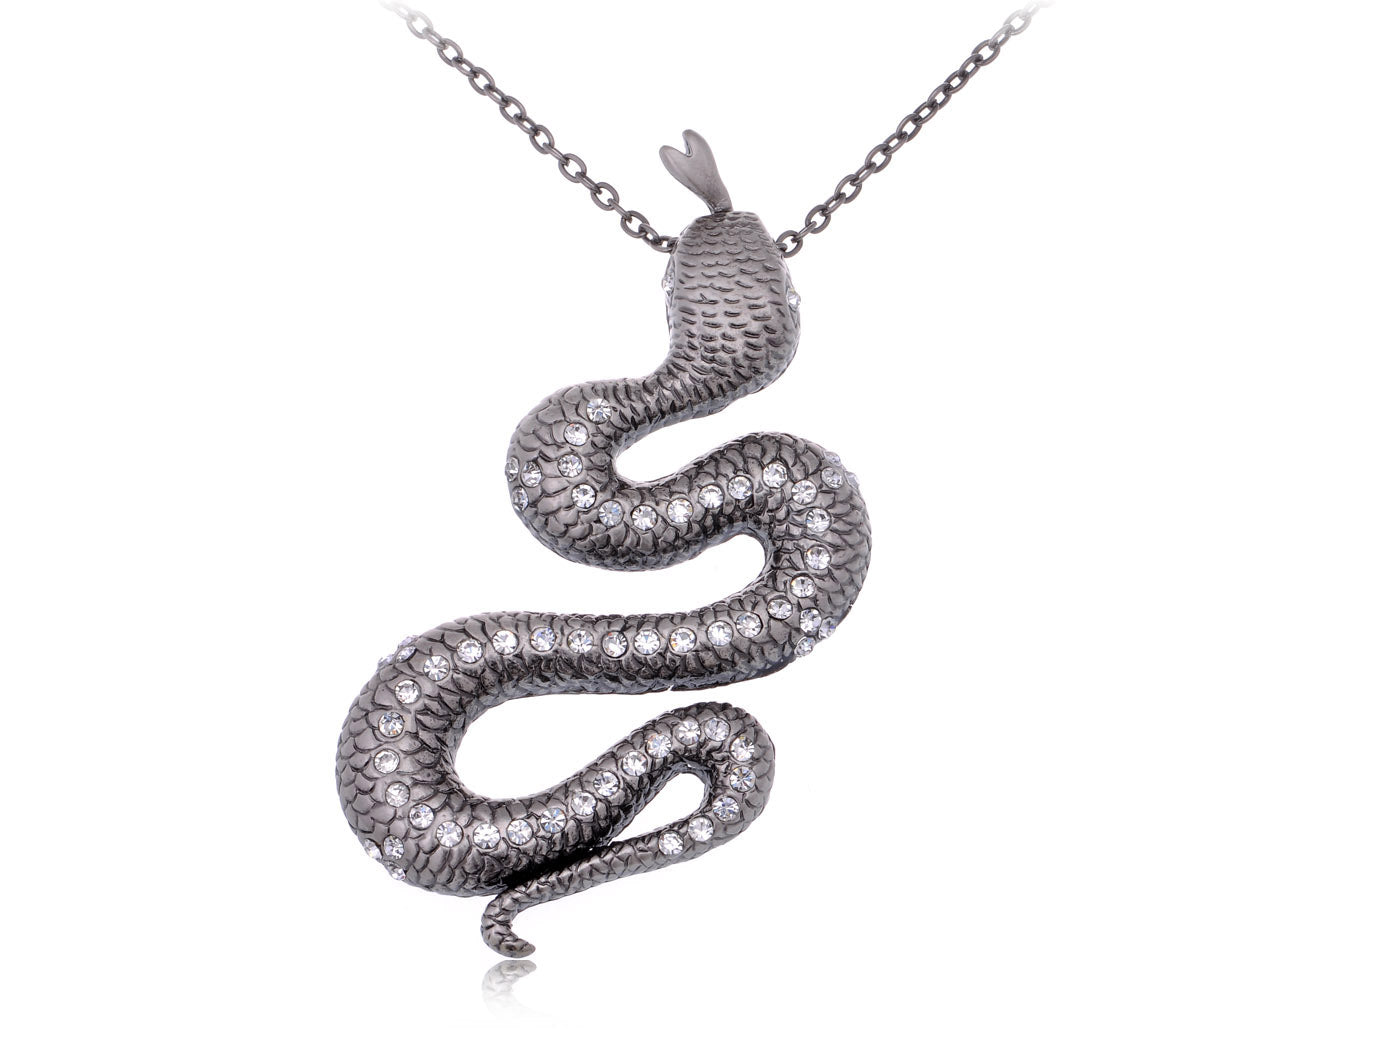 Reptile Slithering Snake Pendant Necklace